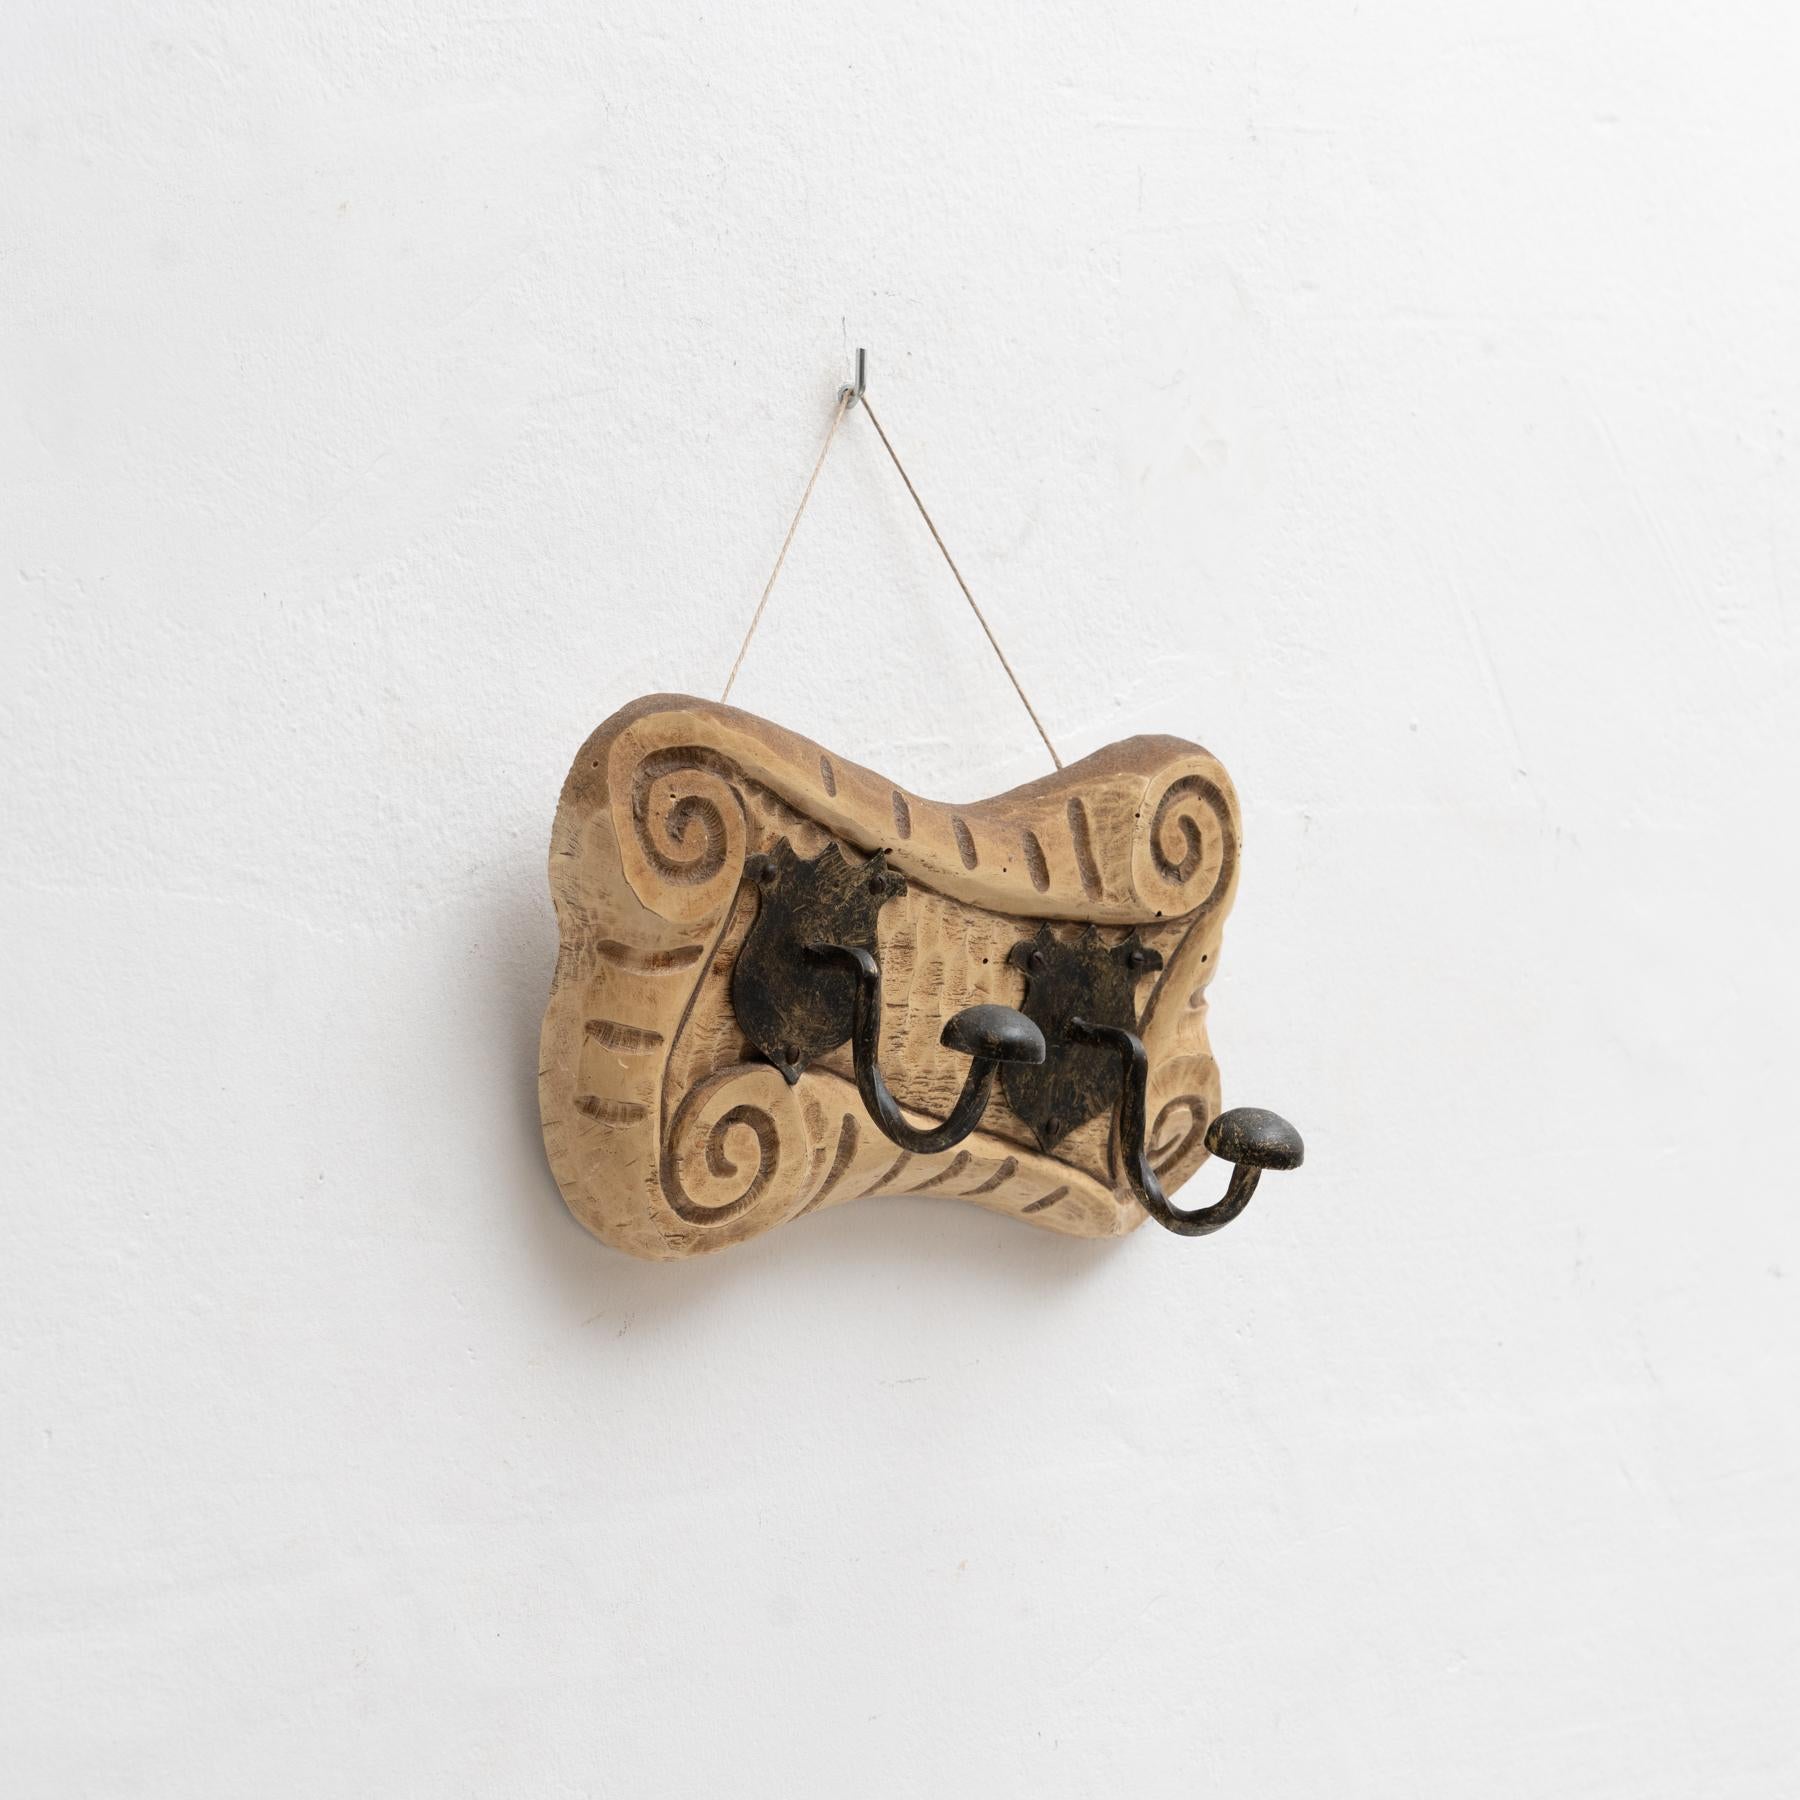 An organic shaped coat hanger.

Manufactured in Spain circa 1950 by unknown manufacturer.

In good original condition with minor wear consistent of age and use, preserving a beautiful patina.

Materials:
Wood.
Metal.